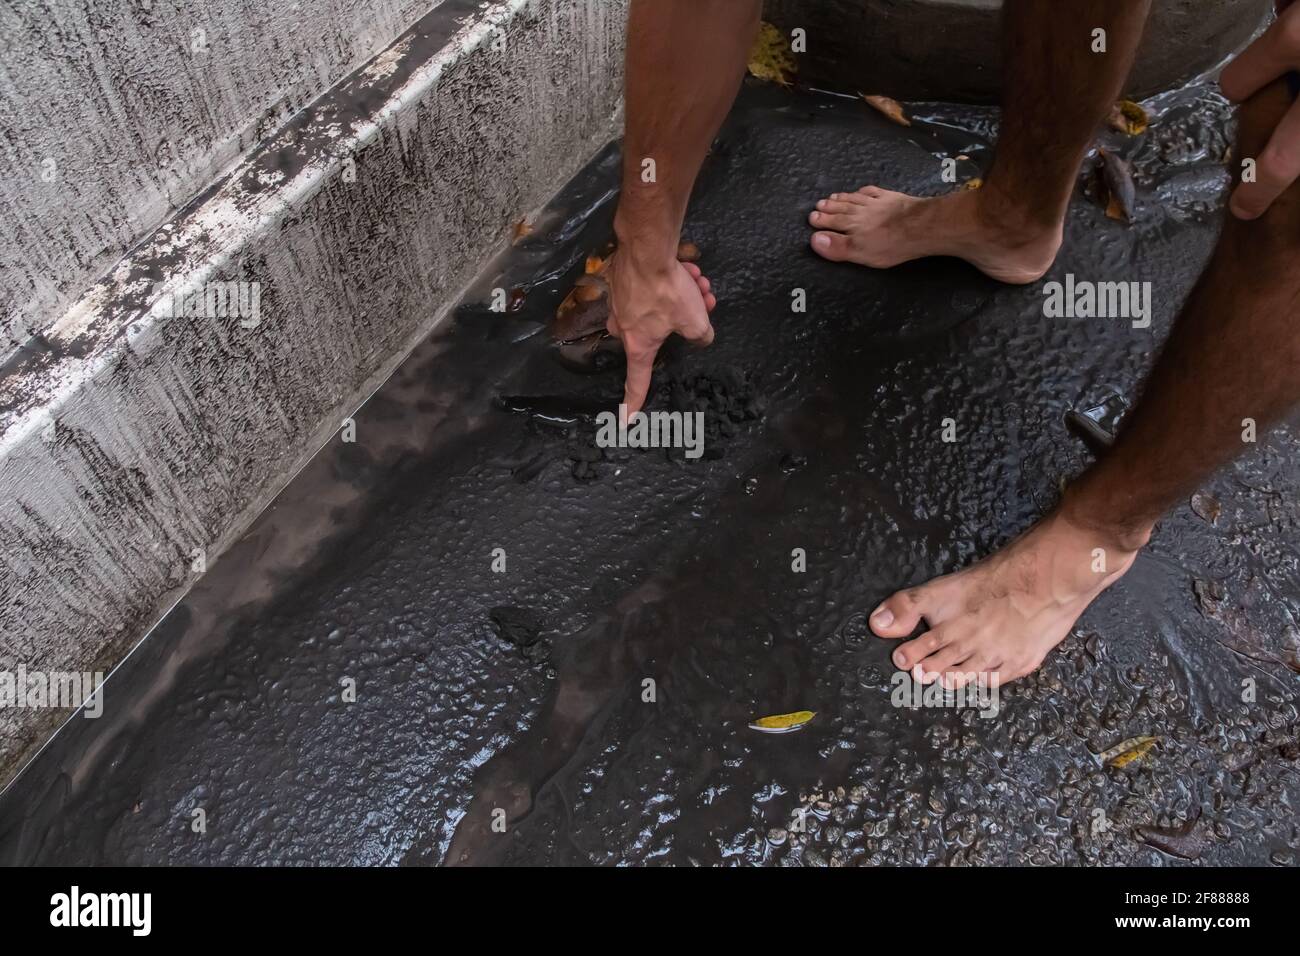 St. James, Barbados - April 11 2021: White man drags finger through wet volcanic ash from St. Vincent's Soufriere volcano eruption. Severe ash fall. Stock Photo